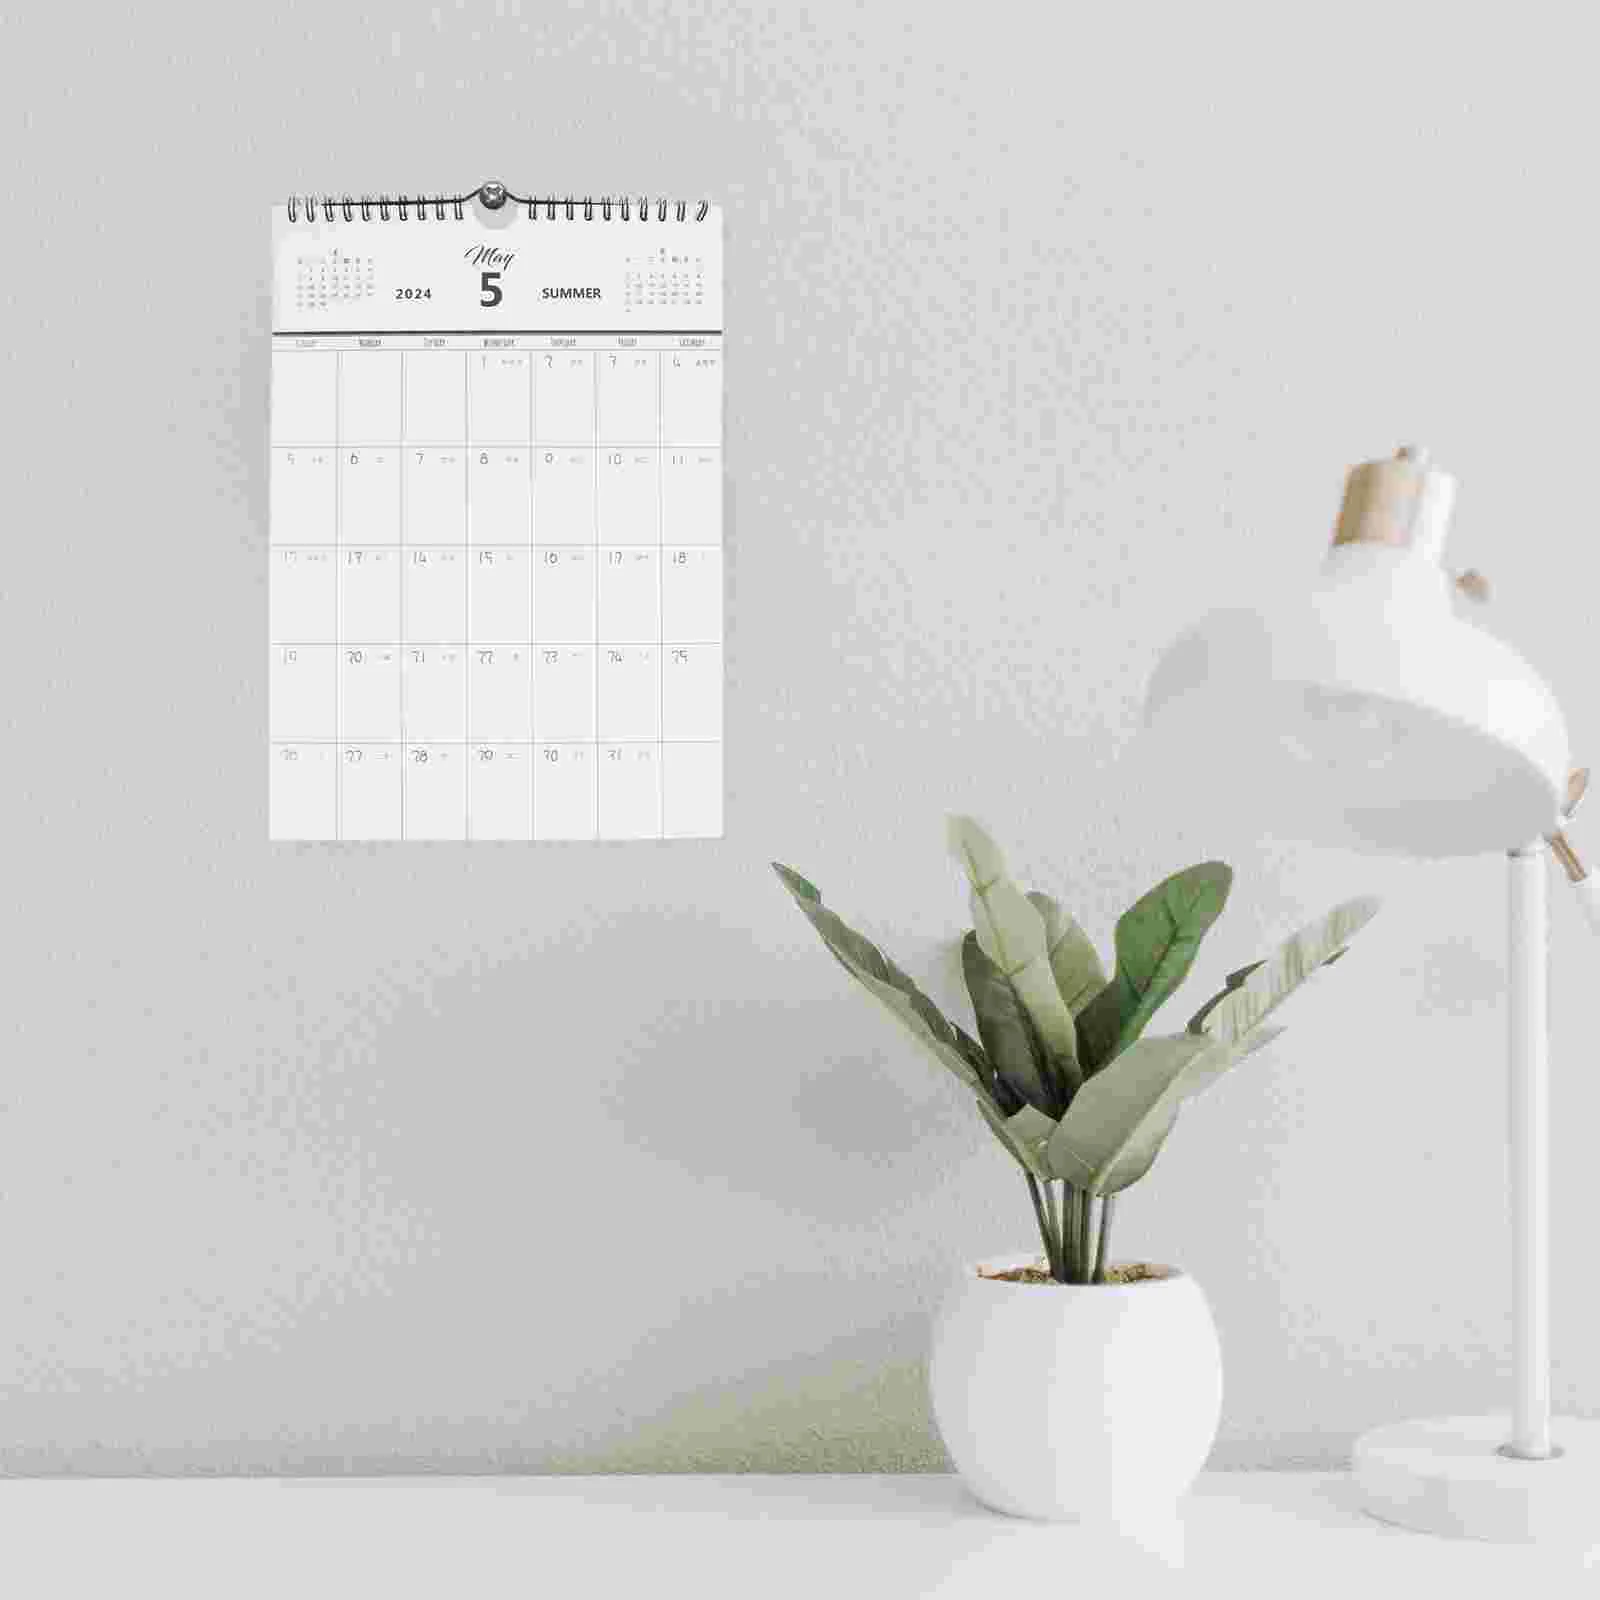 

Planning Calendar Sturdy Countdown Room Daily Wall Hanging Calendar Home Appointment Hanging for Home Office School